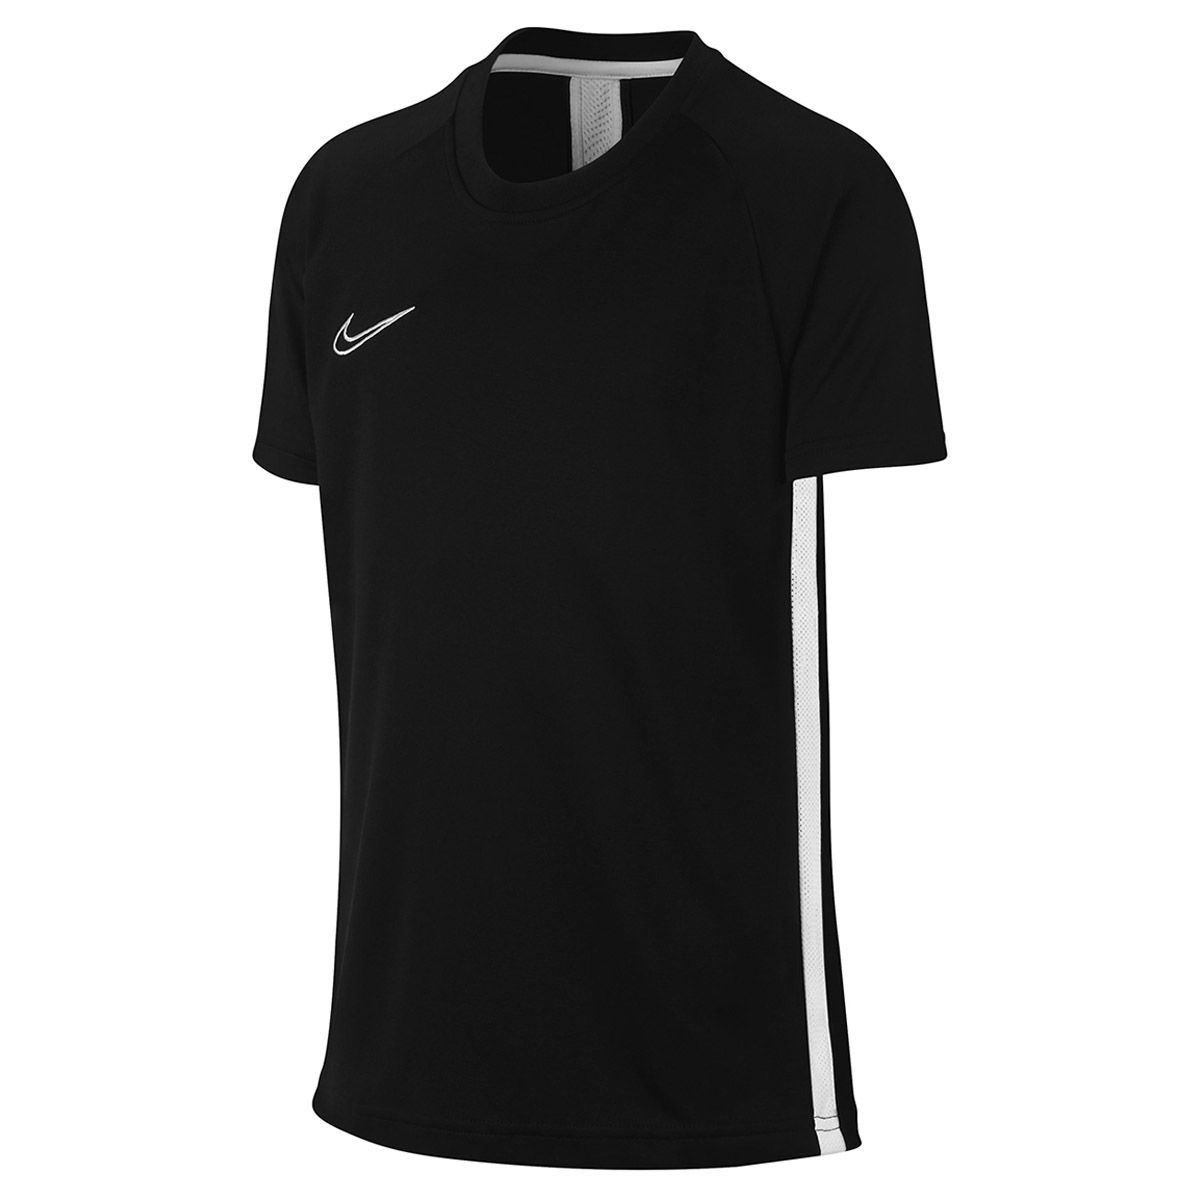 Remera Nike Dry Academy Top | Dexter